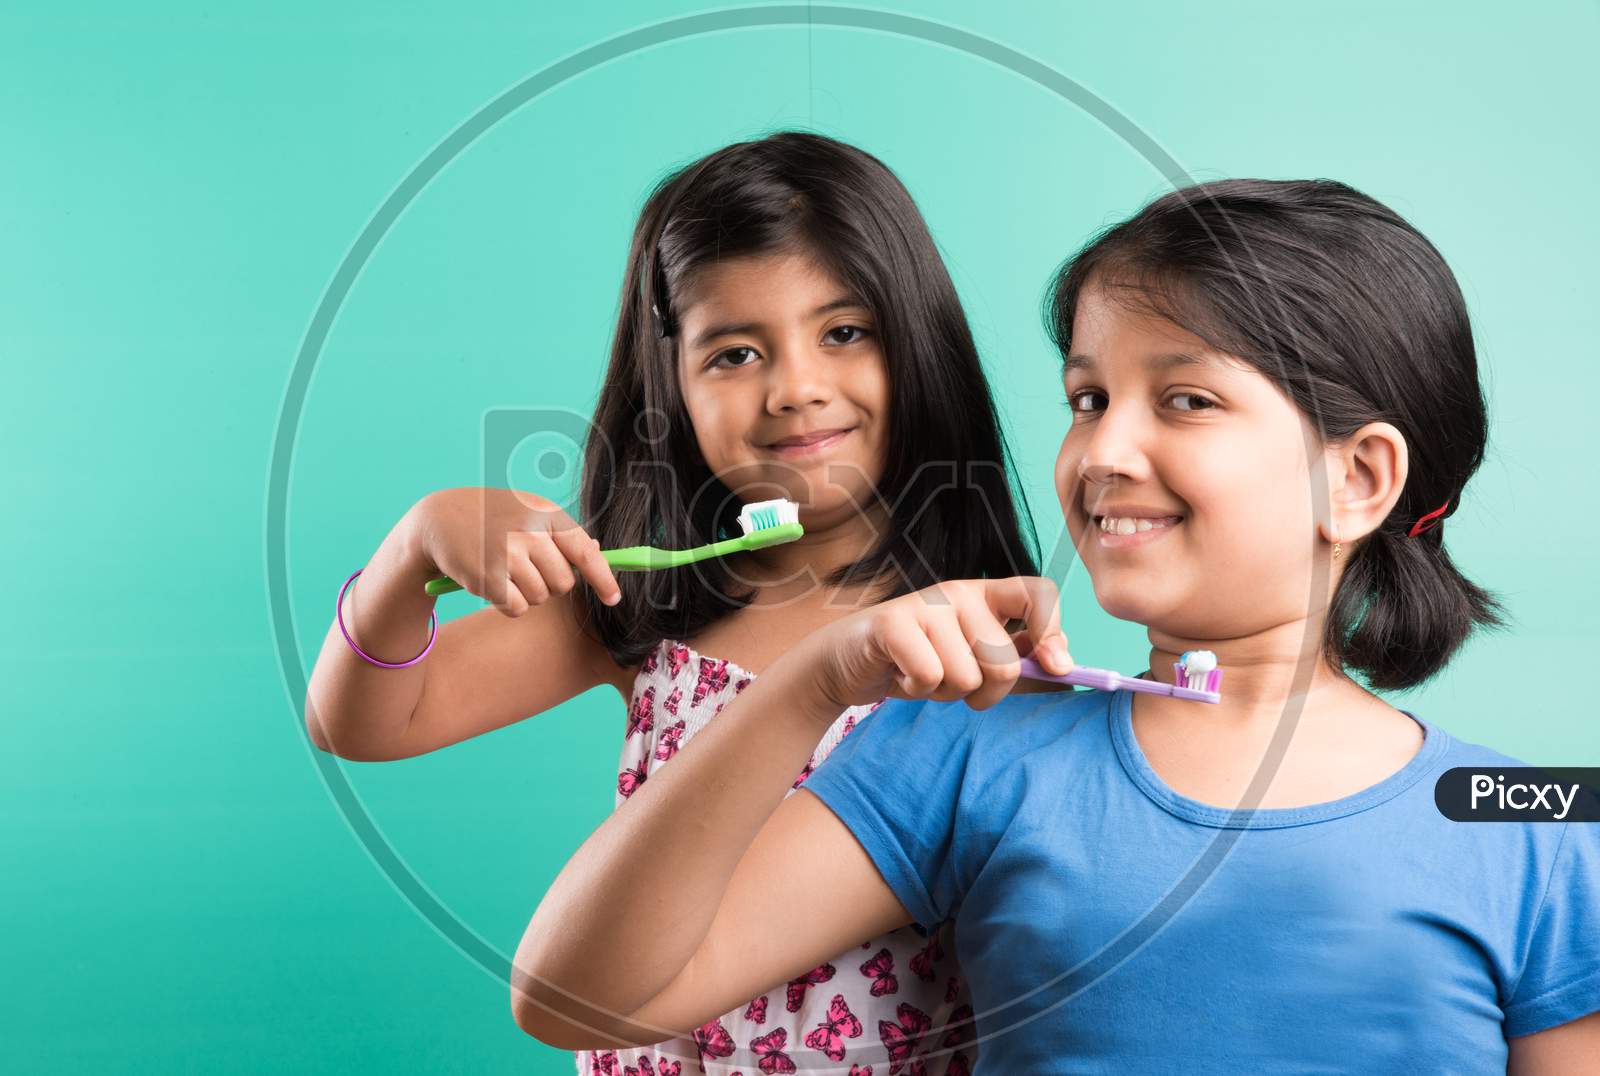 Small girls brushing teeth together